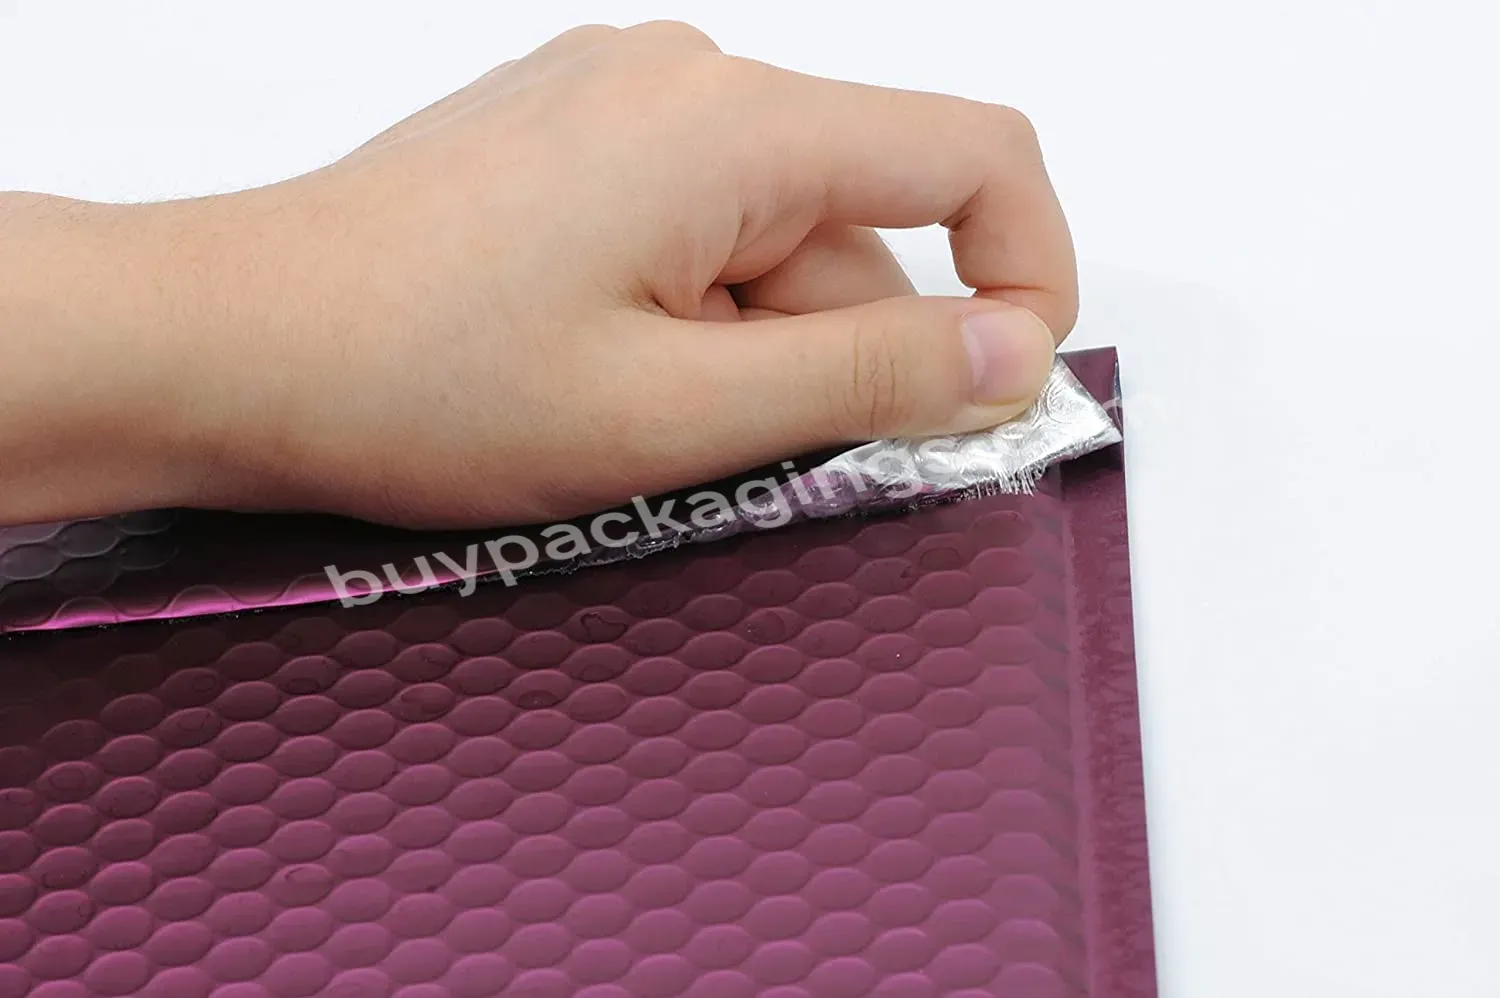 Ctcx Aluminum Insulated Bubble Mailing Foil Mailers Bubble Padded Envelopes Custom Hot Pink Metallic Bubble/buble Mailer